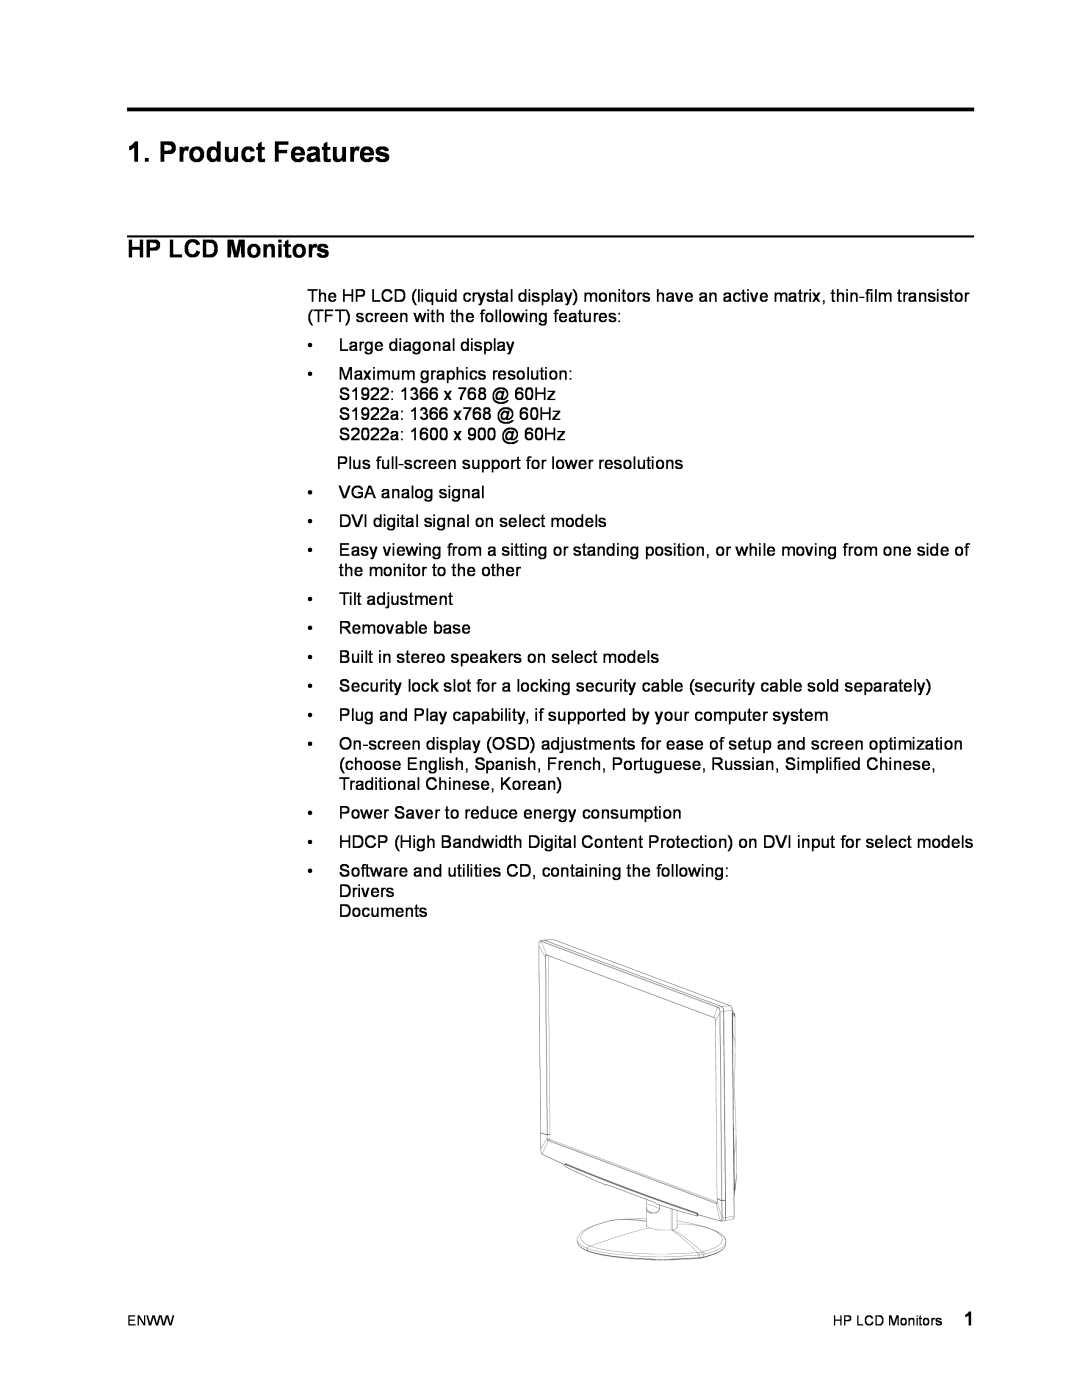 HP S1922 manual Product Features, HP LCD Monitors 